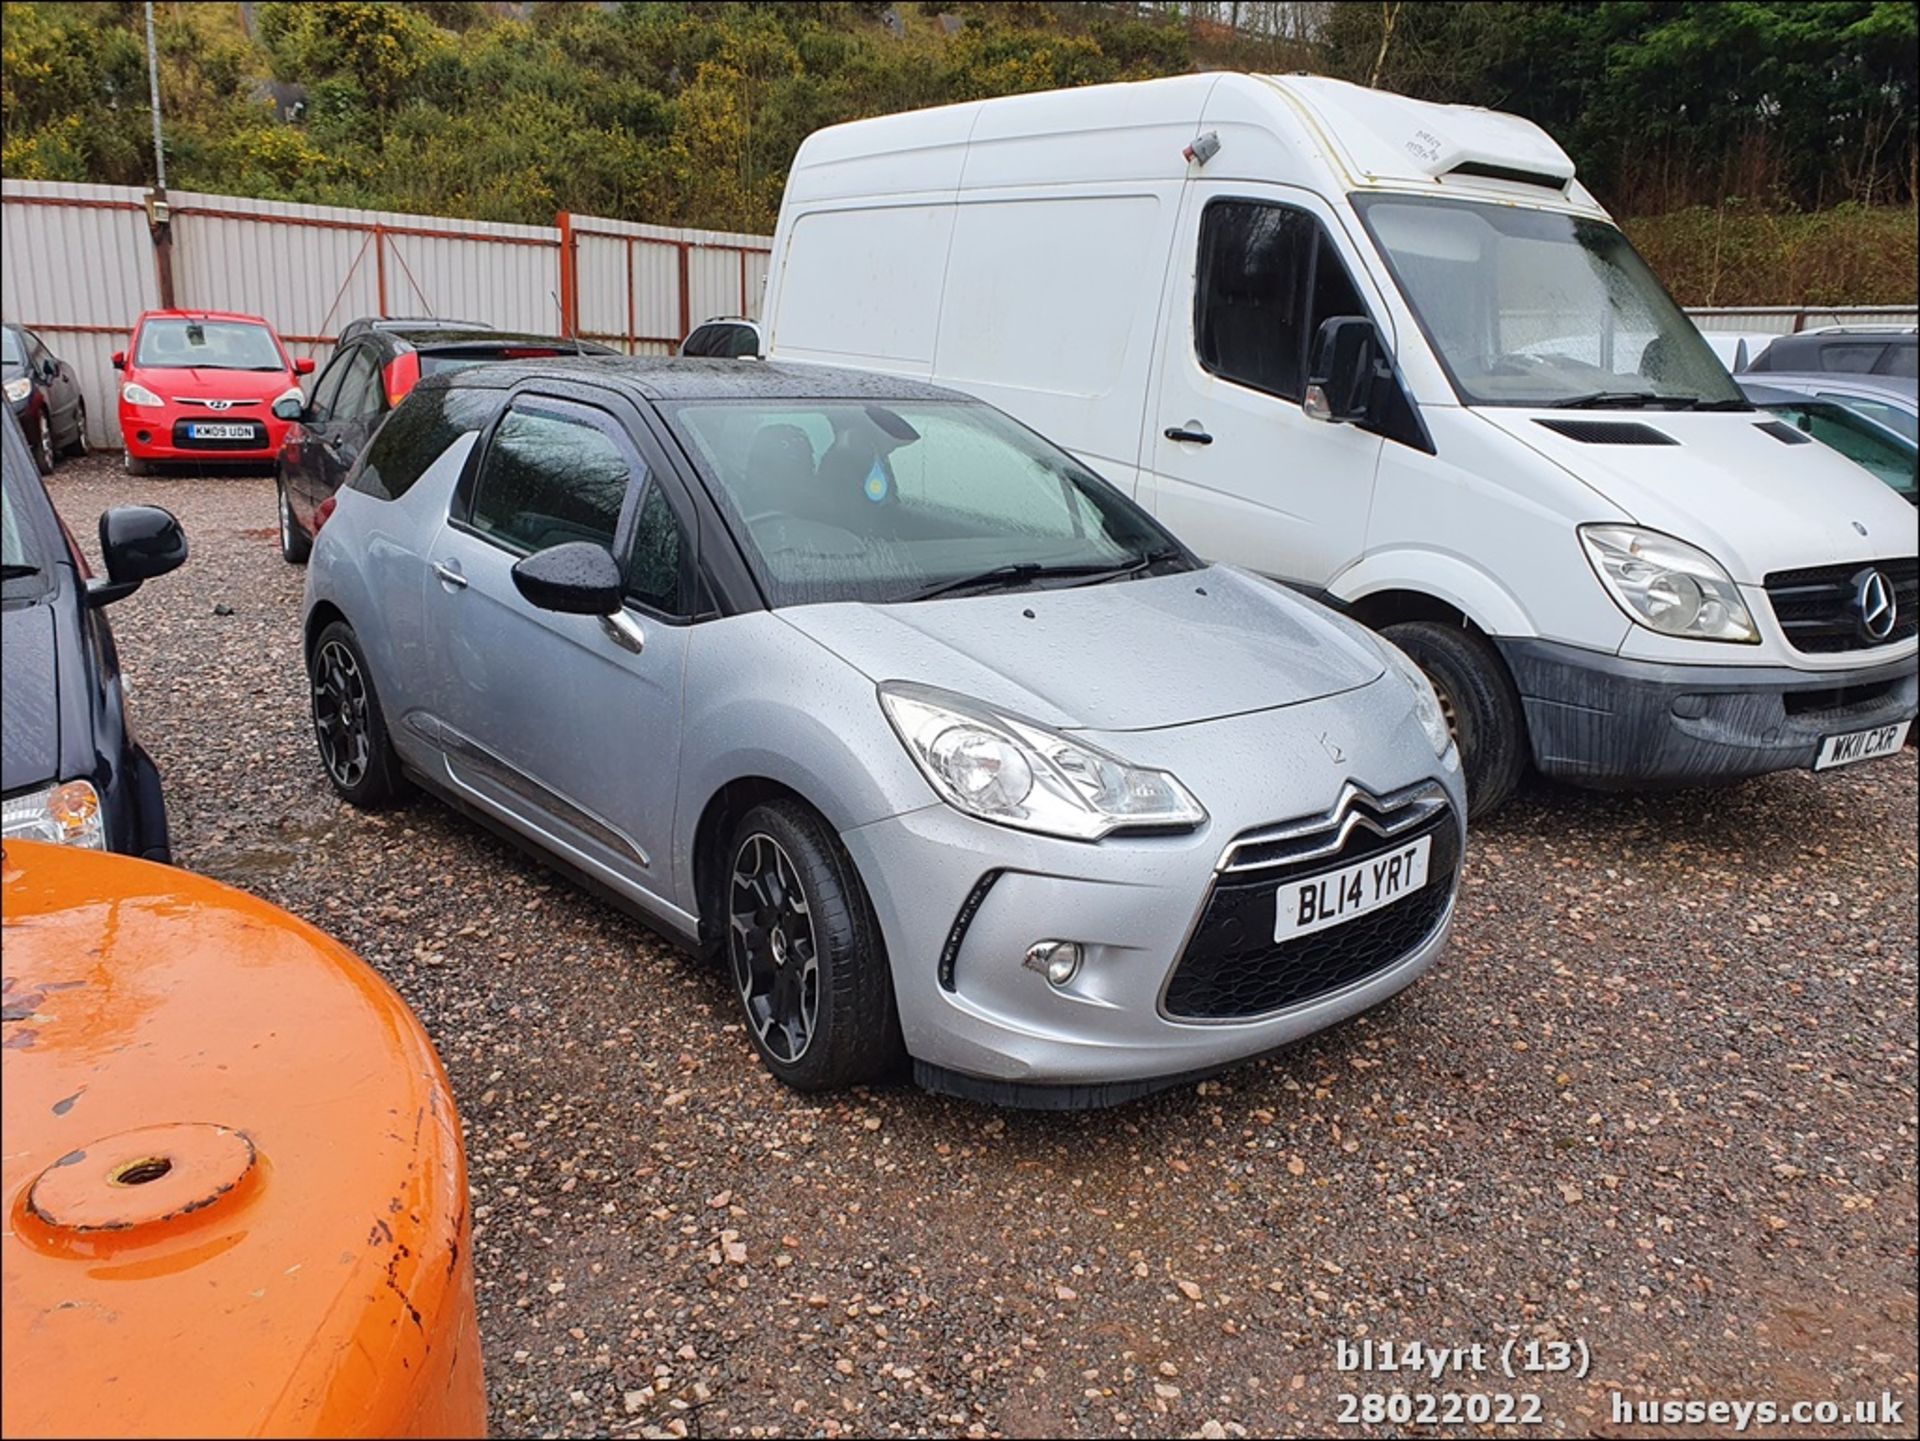 14/14 CITROEN DS3 DSTYLE + E-HDI - 1560cc 3dr Hatchback (Silver, 122k) - Image 14 of 25